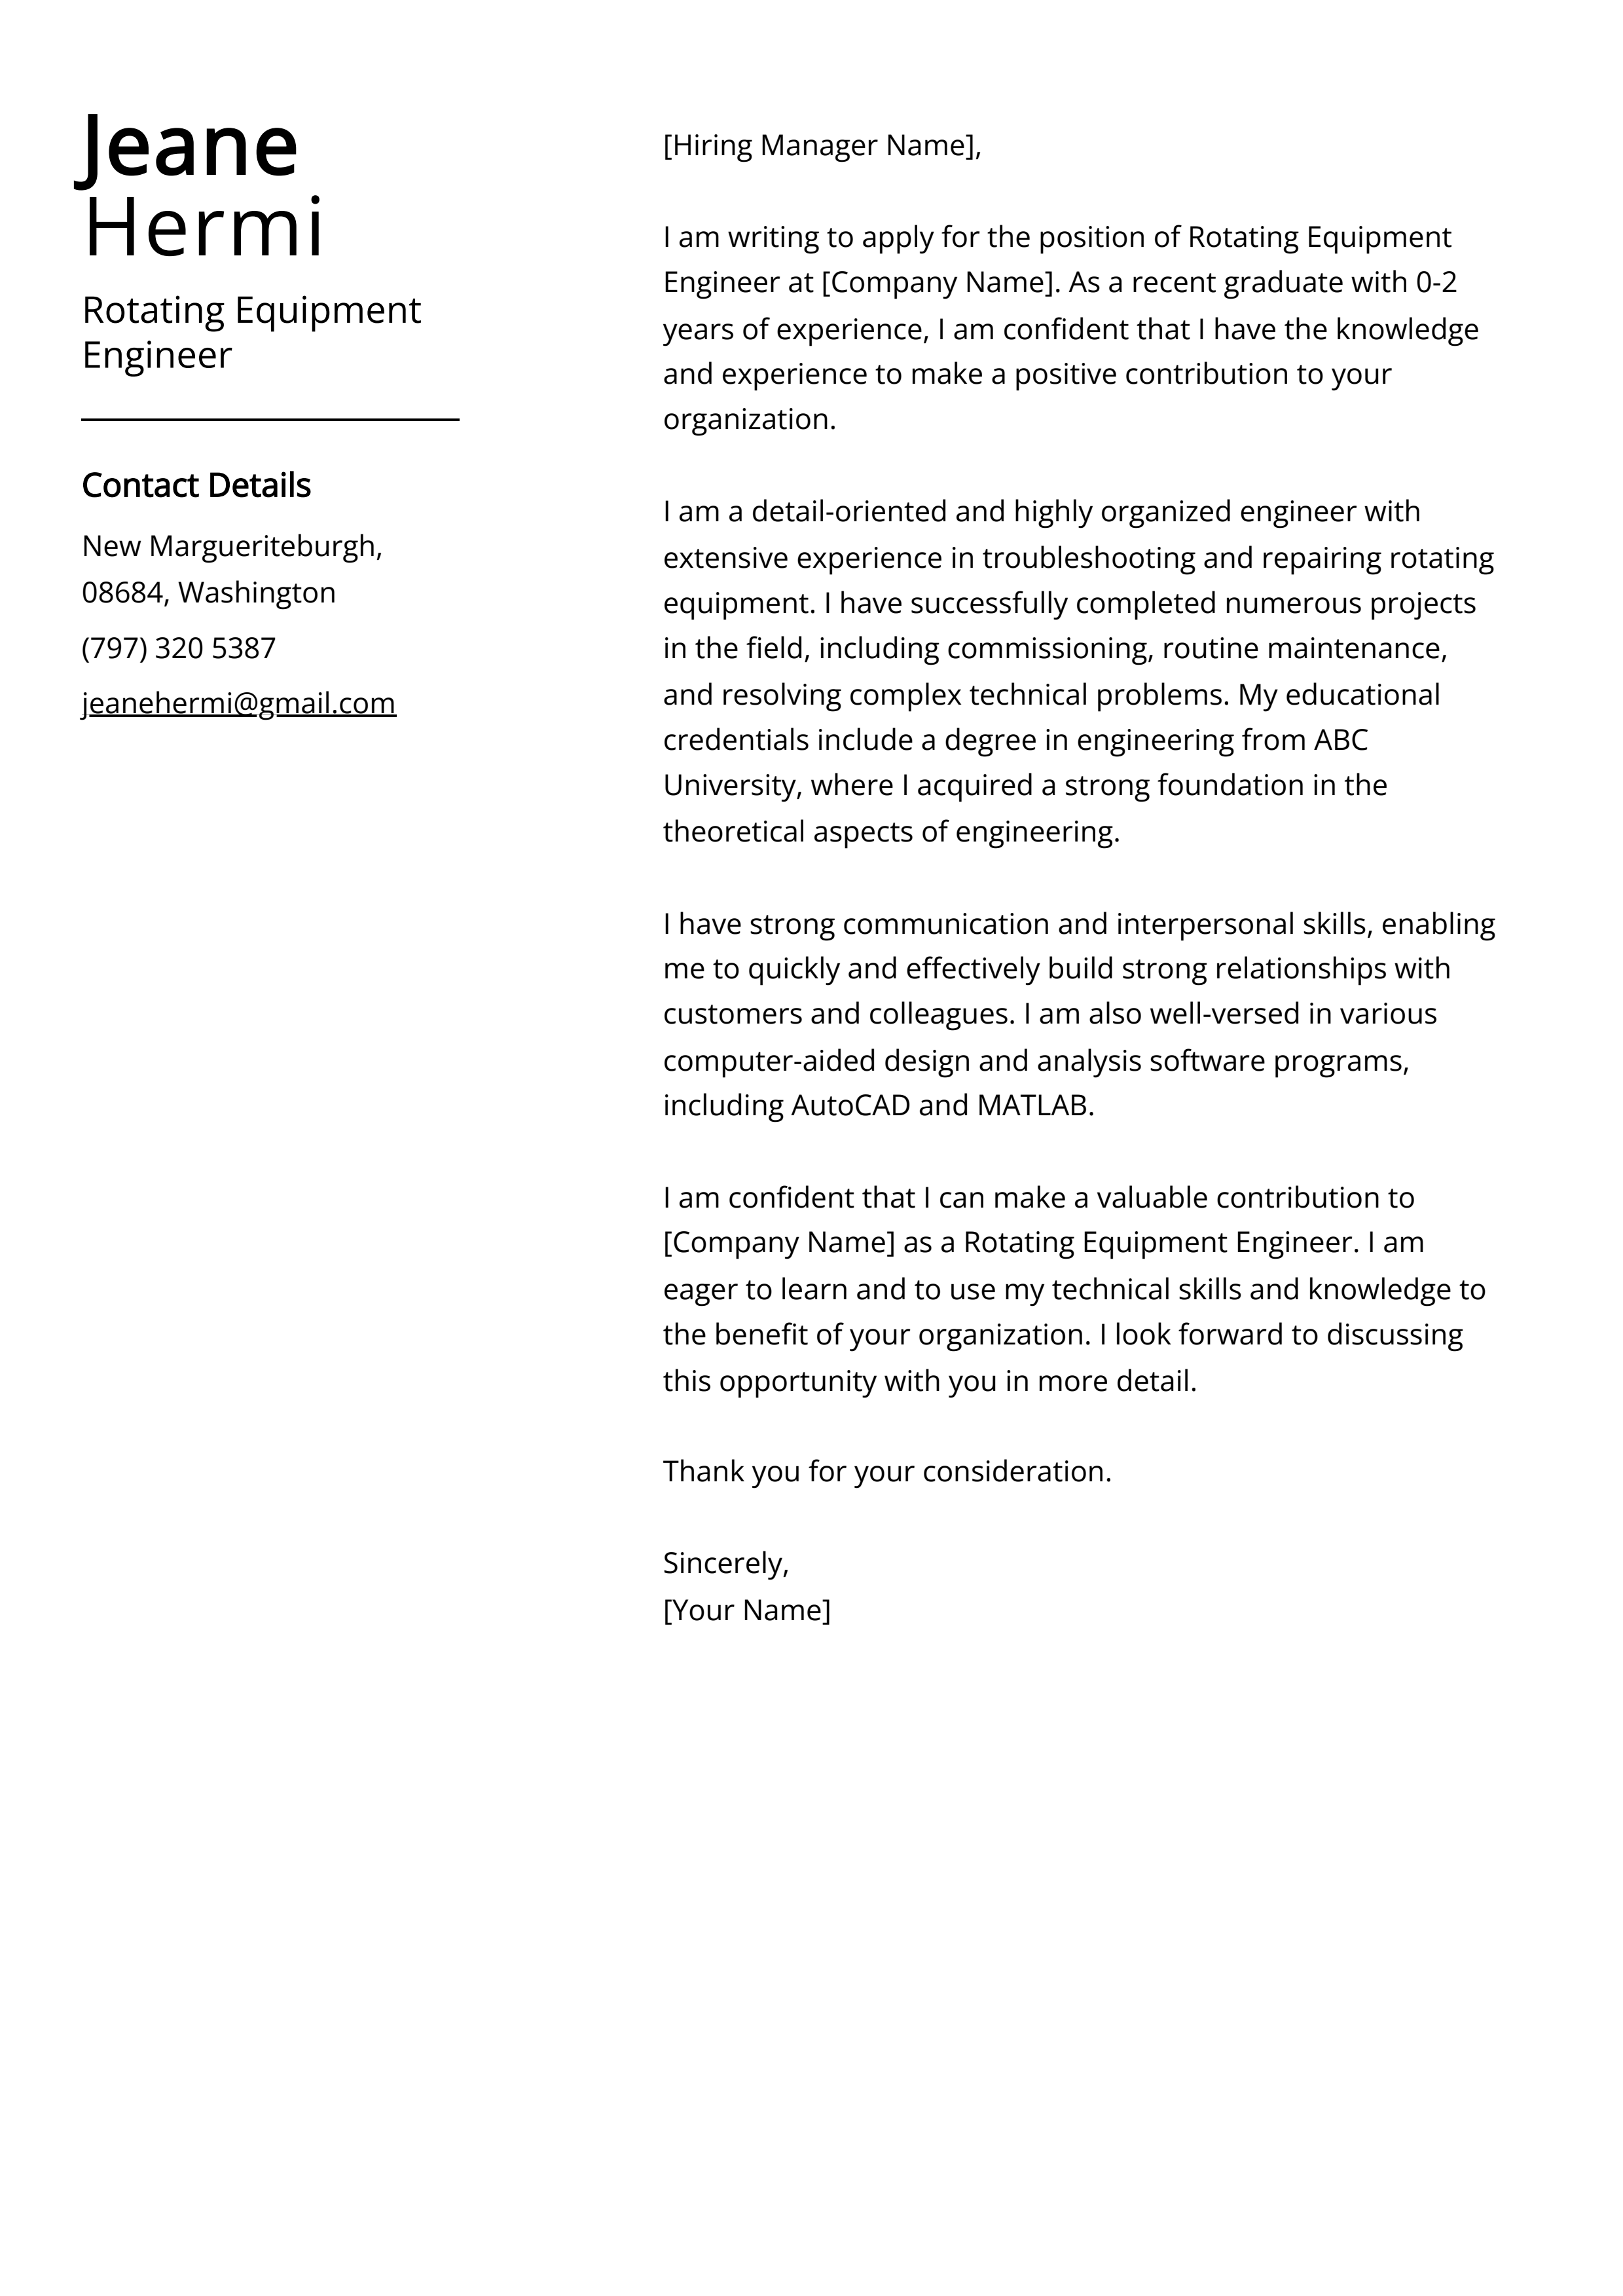 Rotating Equipment Engineer Cover Letter Example